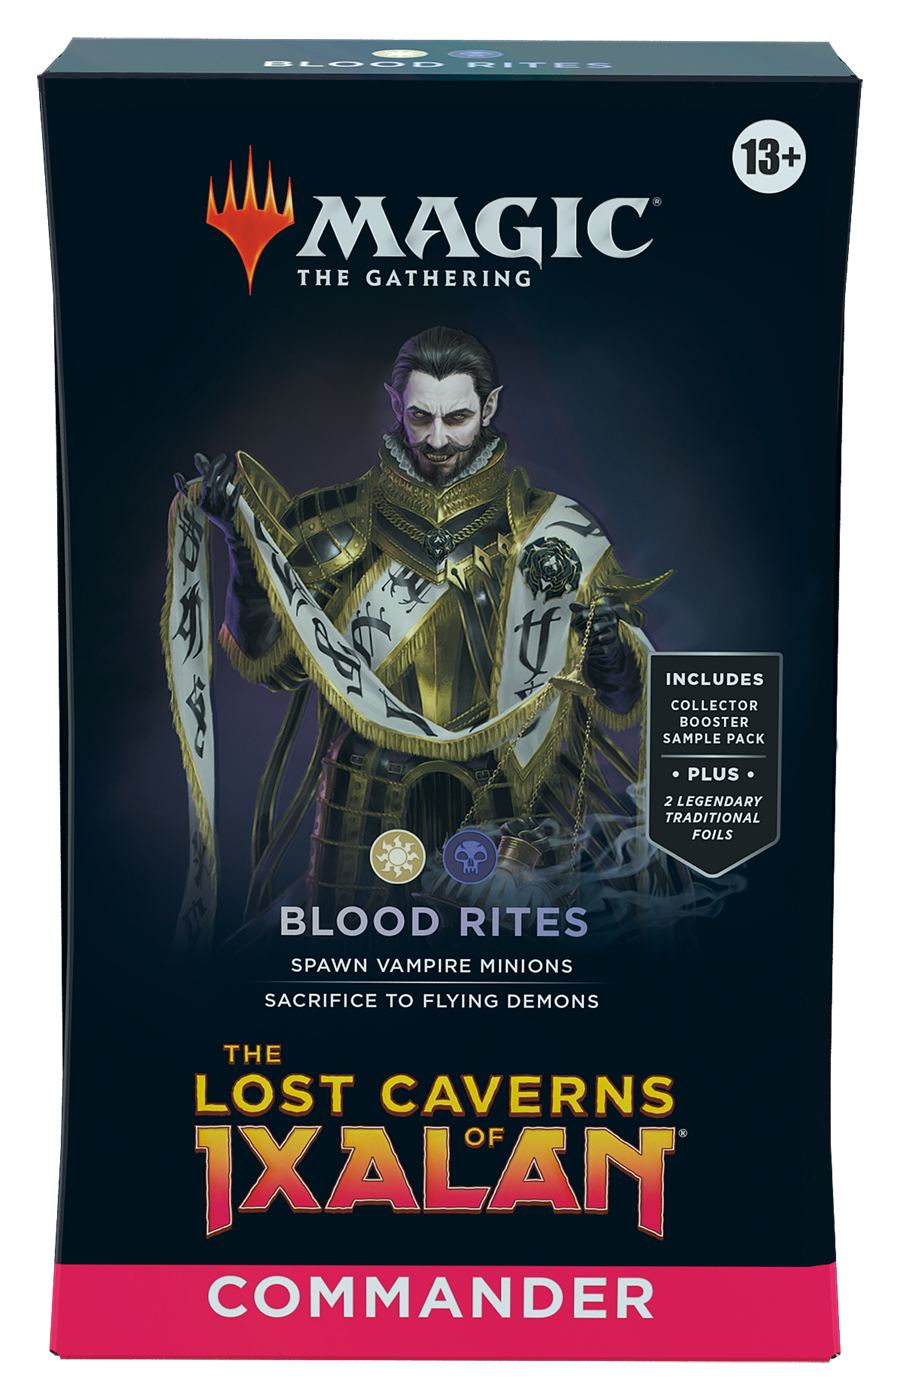 BLOOD RITES THE LOST CAVERNS OF IXALAN COMMANDER DECK